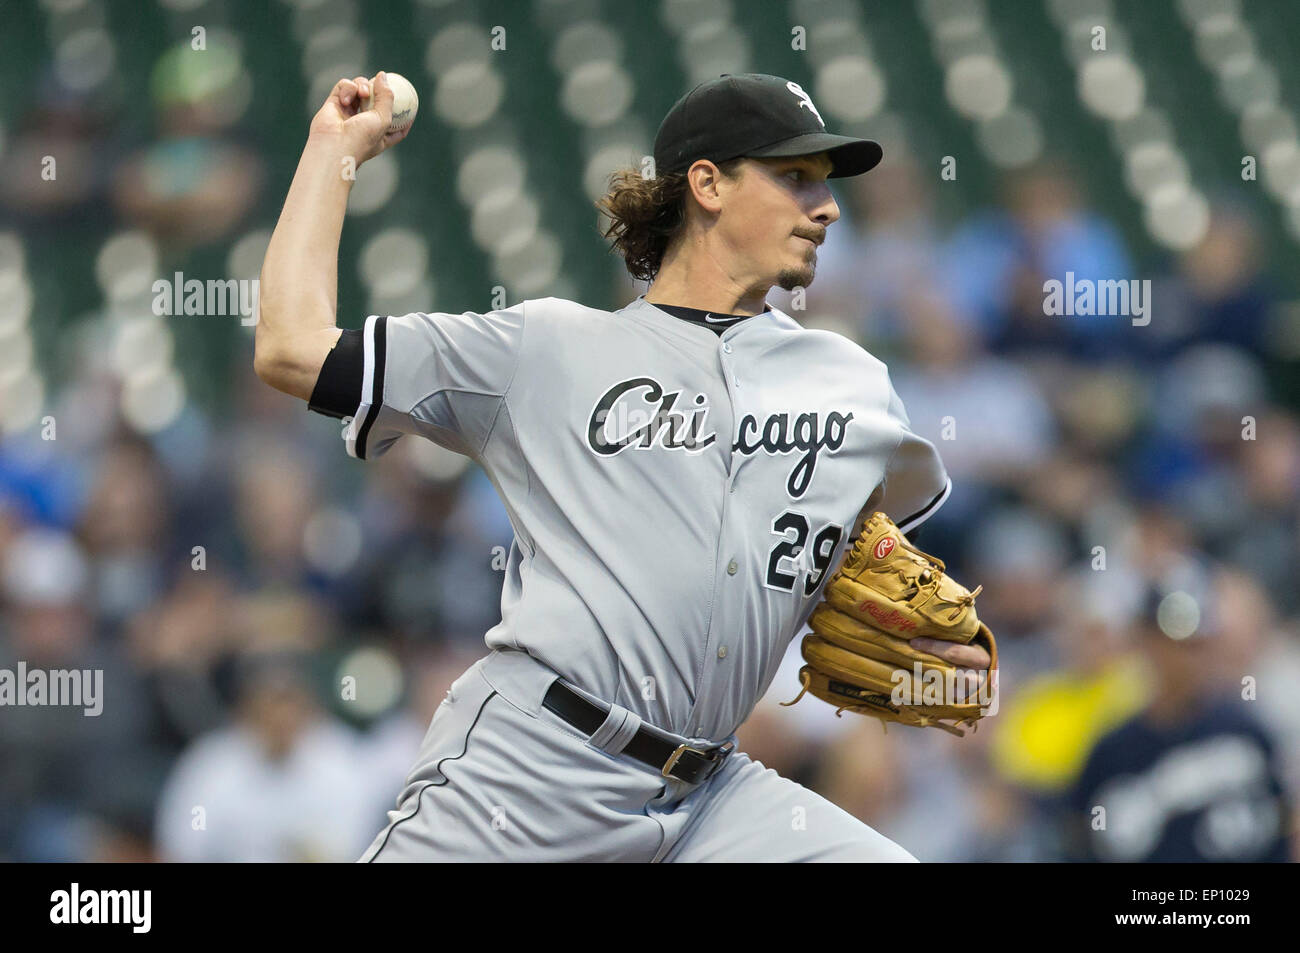 Milwaukee, WI, USA. 11th May, 2015. Chicago White Sox starting pitcher Jeff Samardzija #29 delivers a pitch in the Major League Baseball game between the Milwaukee Brewers and the Chicago White Sox at Miller Park in Milwaukee, WI. Brewers defeated the Sox 10-7. John Fisher/CSM/Alamy Live News Stock Photo